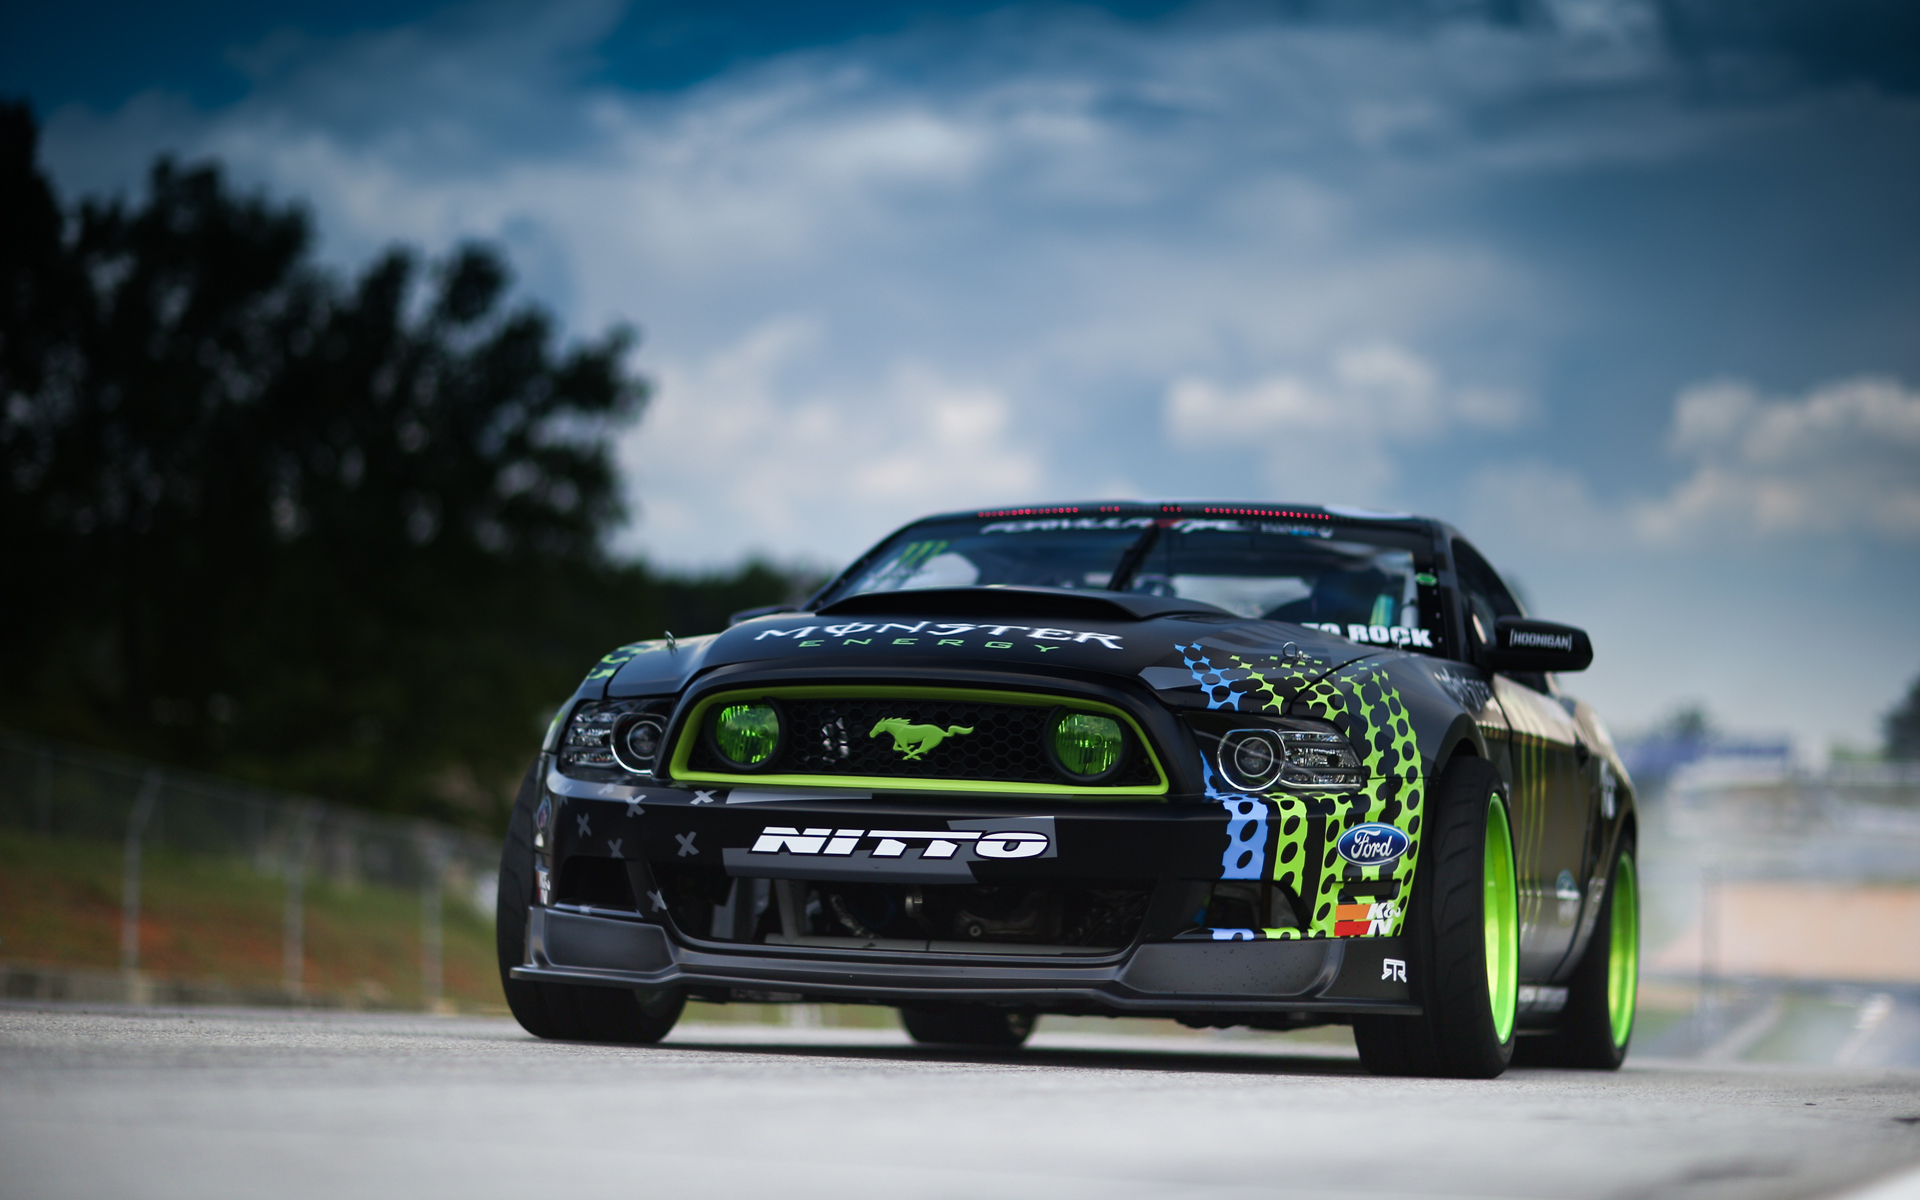 Free download wallpaper Ford, Car, Race Car, Vehicles, Ford Mustang Rtr on your PC desktop